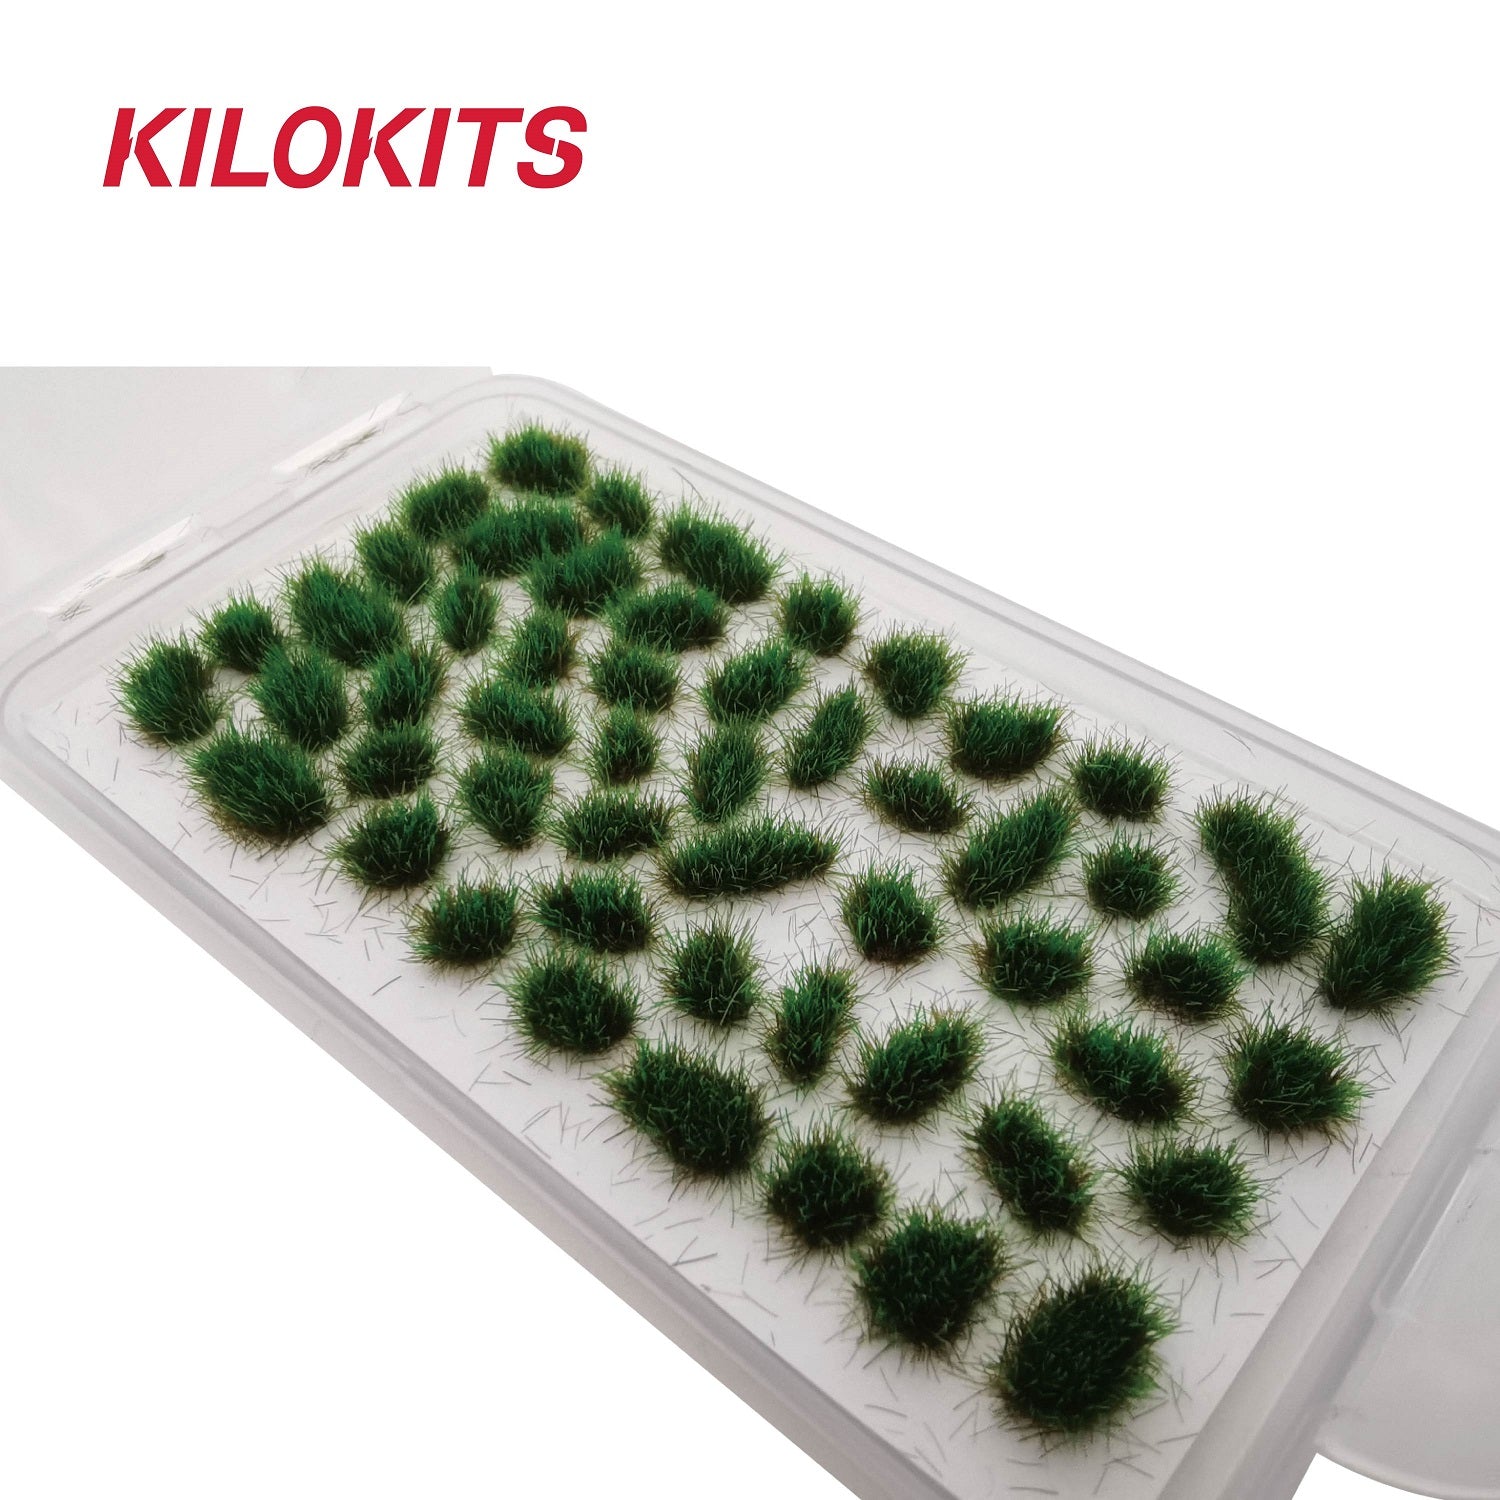 Small Pieces Model Grass Cluster Plants #1018H-N